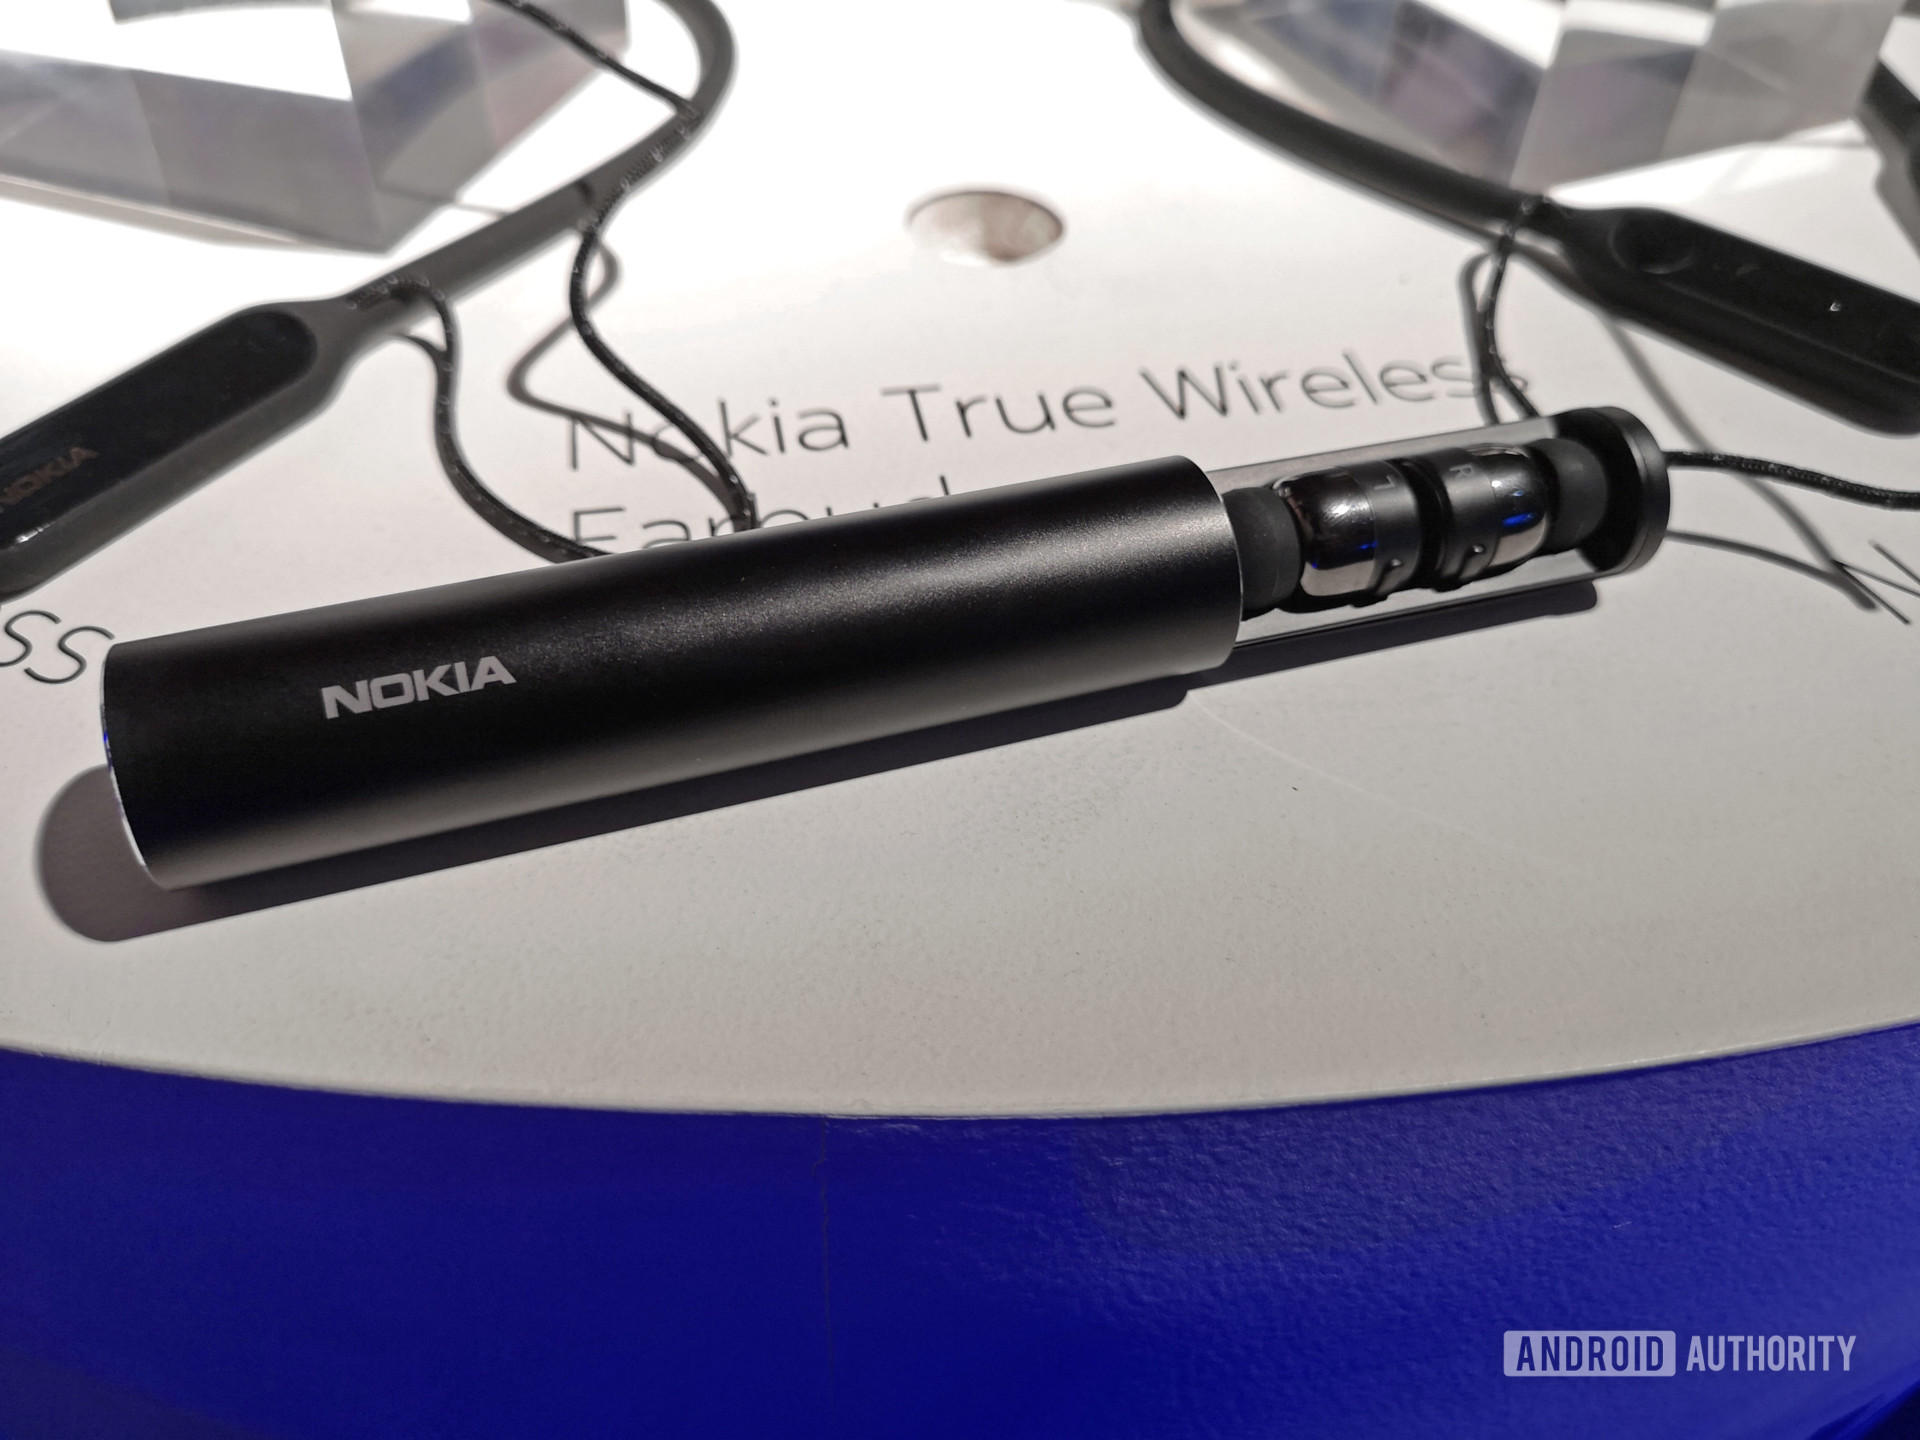 Nokia True Wireless V1 earphones on display at launch event.